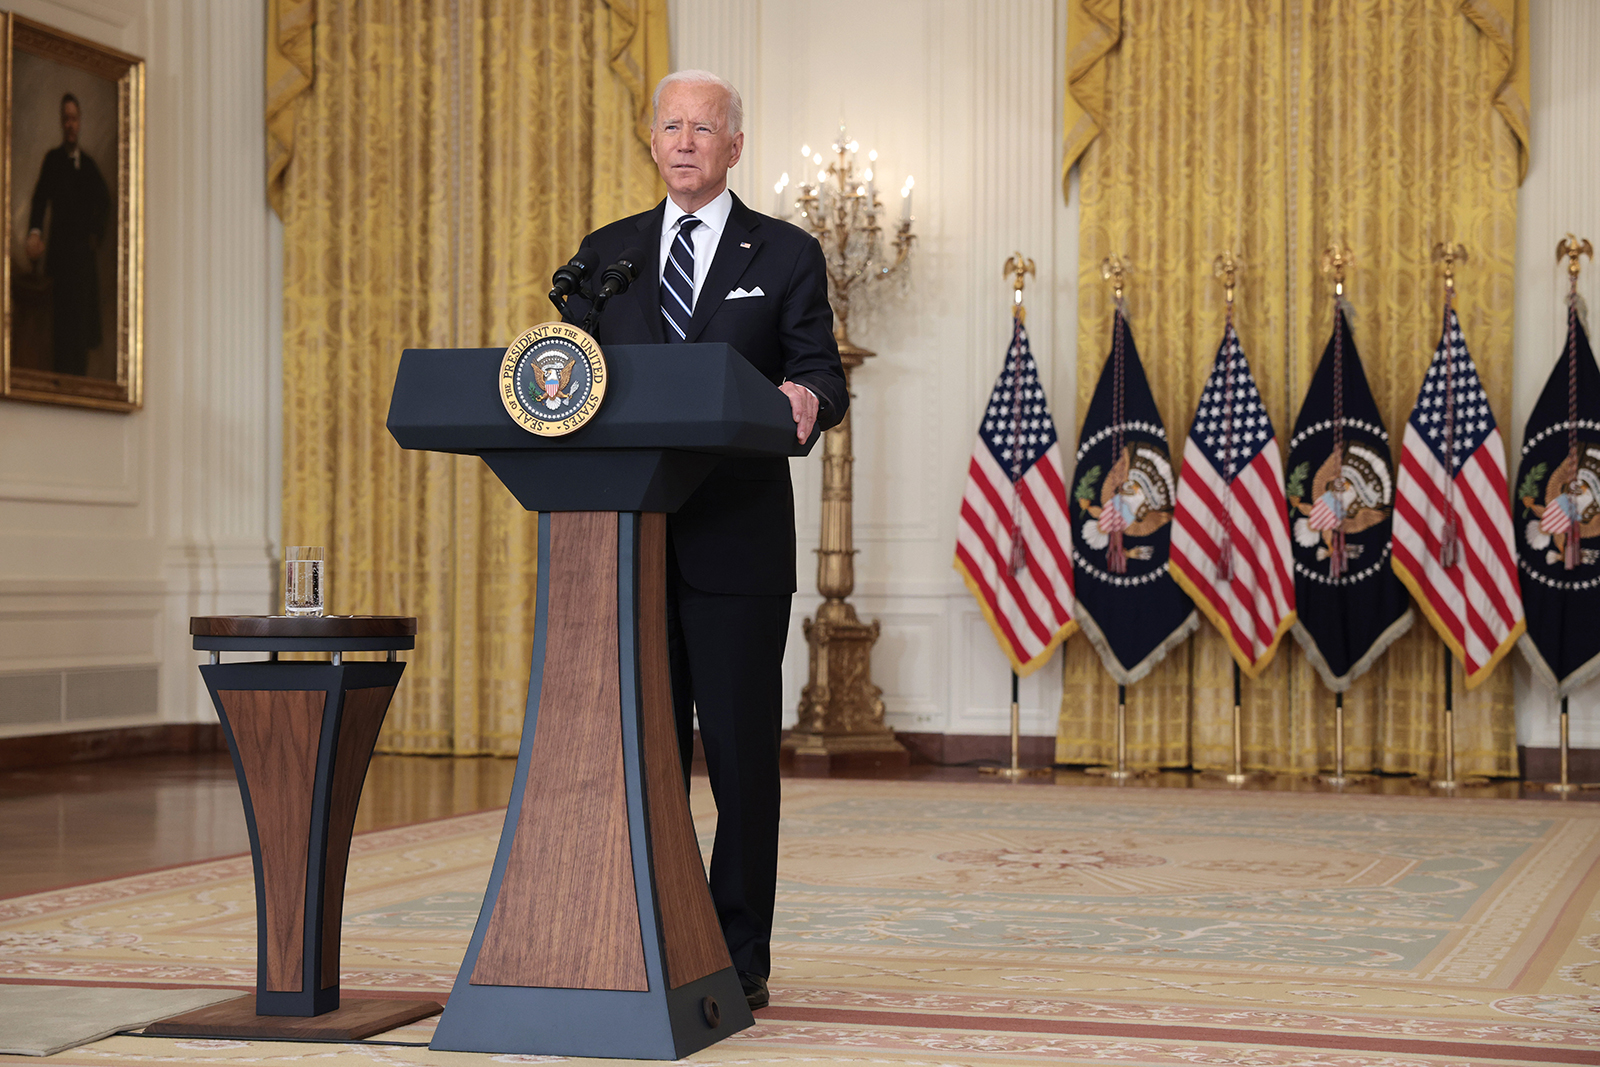 President Joe Biden delivers remarks in the East Room of the White House on August 18, in Washington.